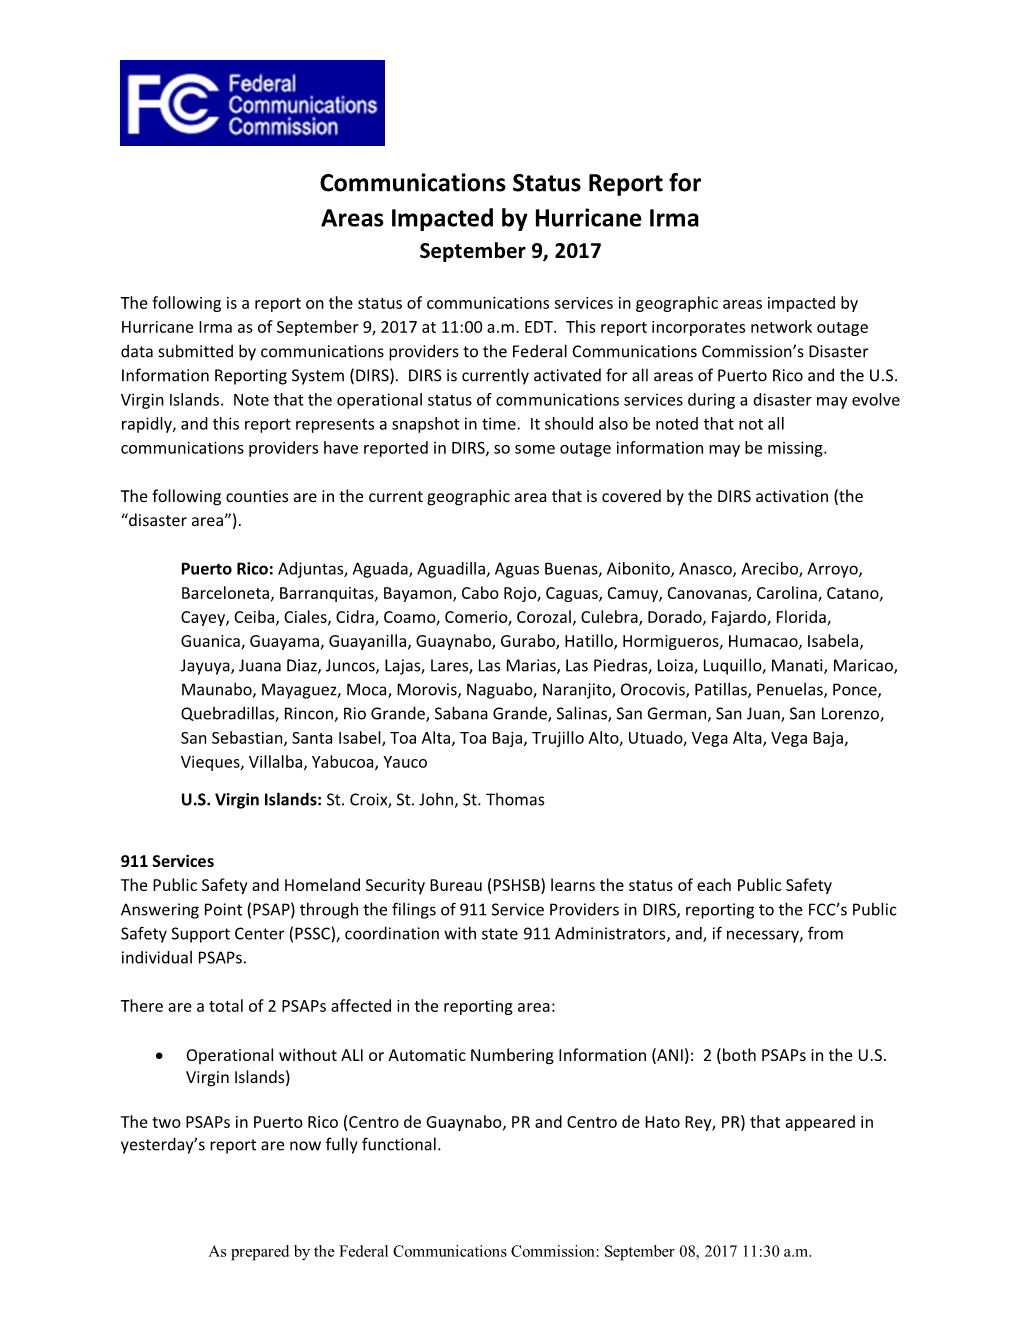 Communications Status Report for Areas Impacted by Hurricane Irma September 9, 2017